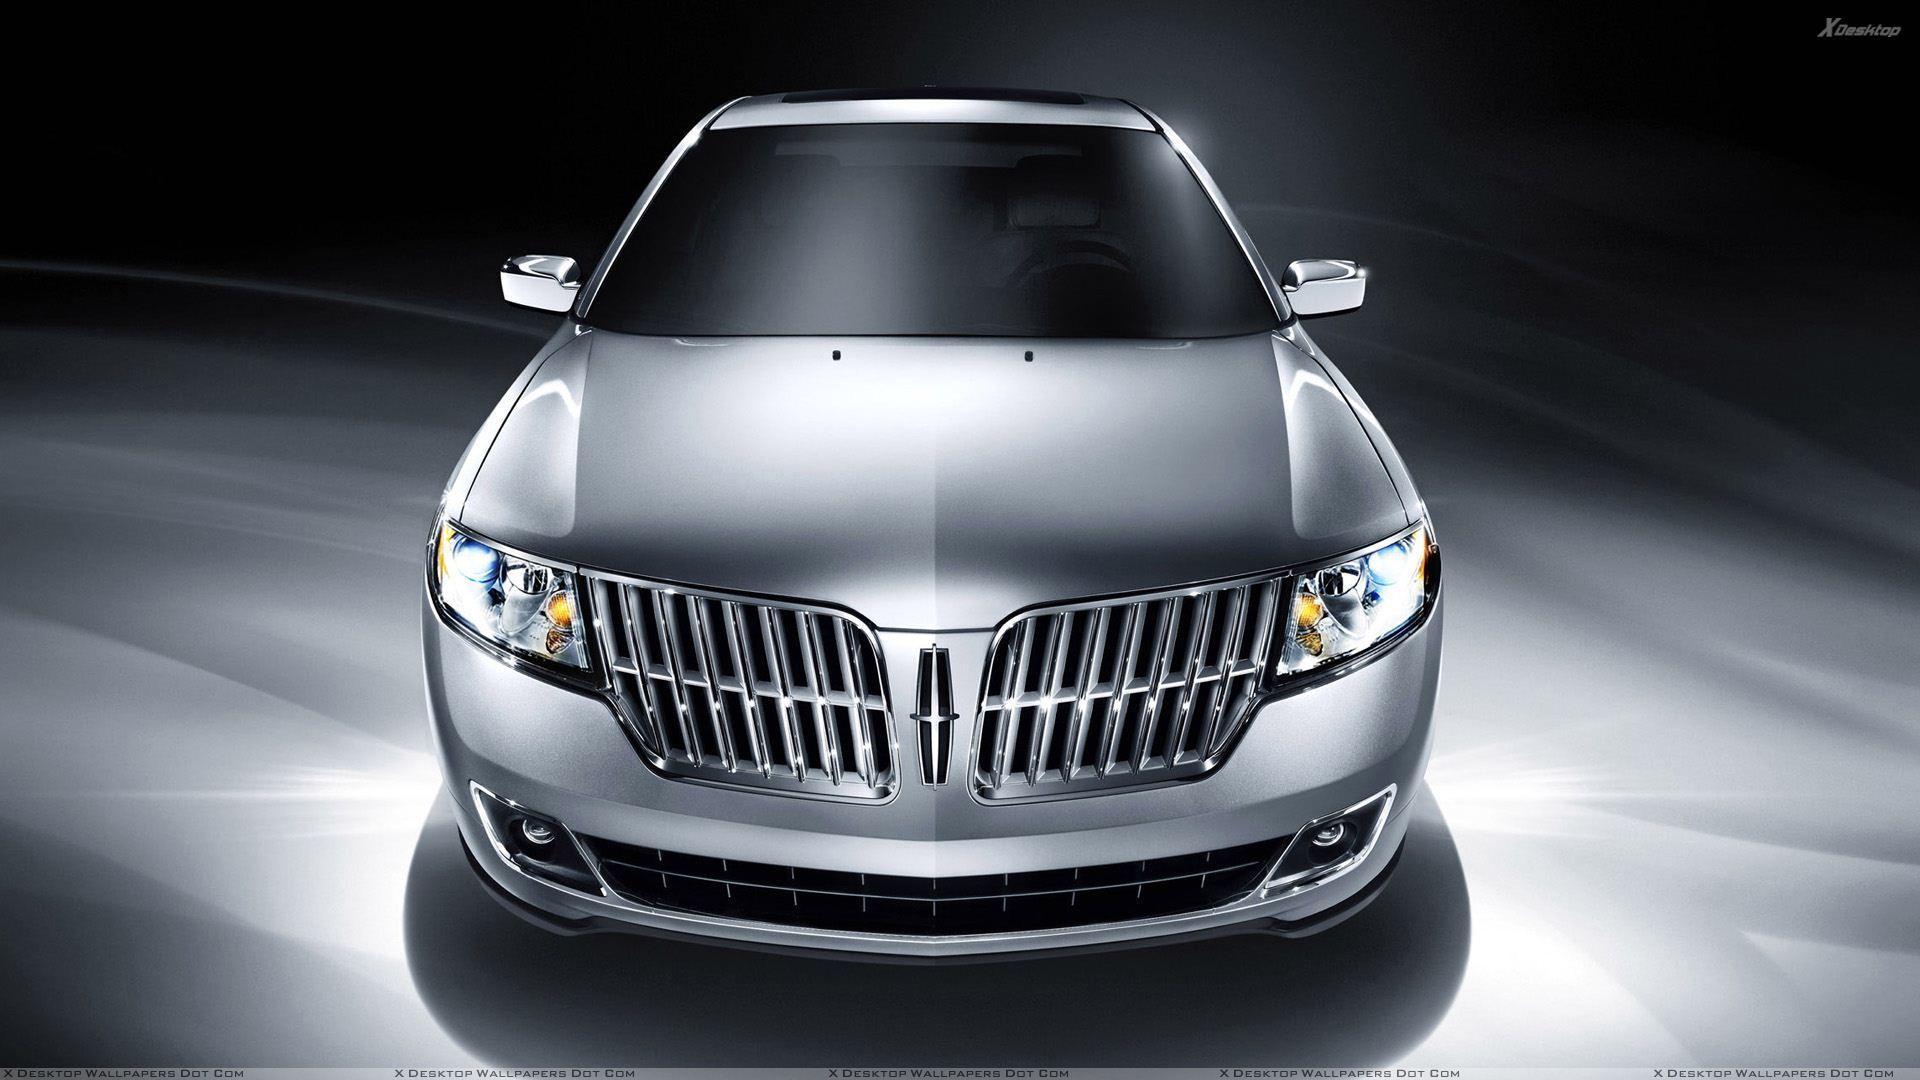 Lincoln MKZ Wallpaper, Photo & Image in HD